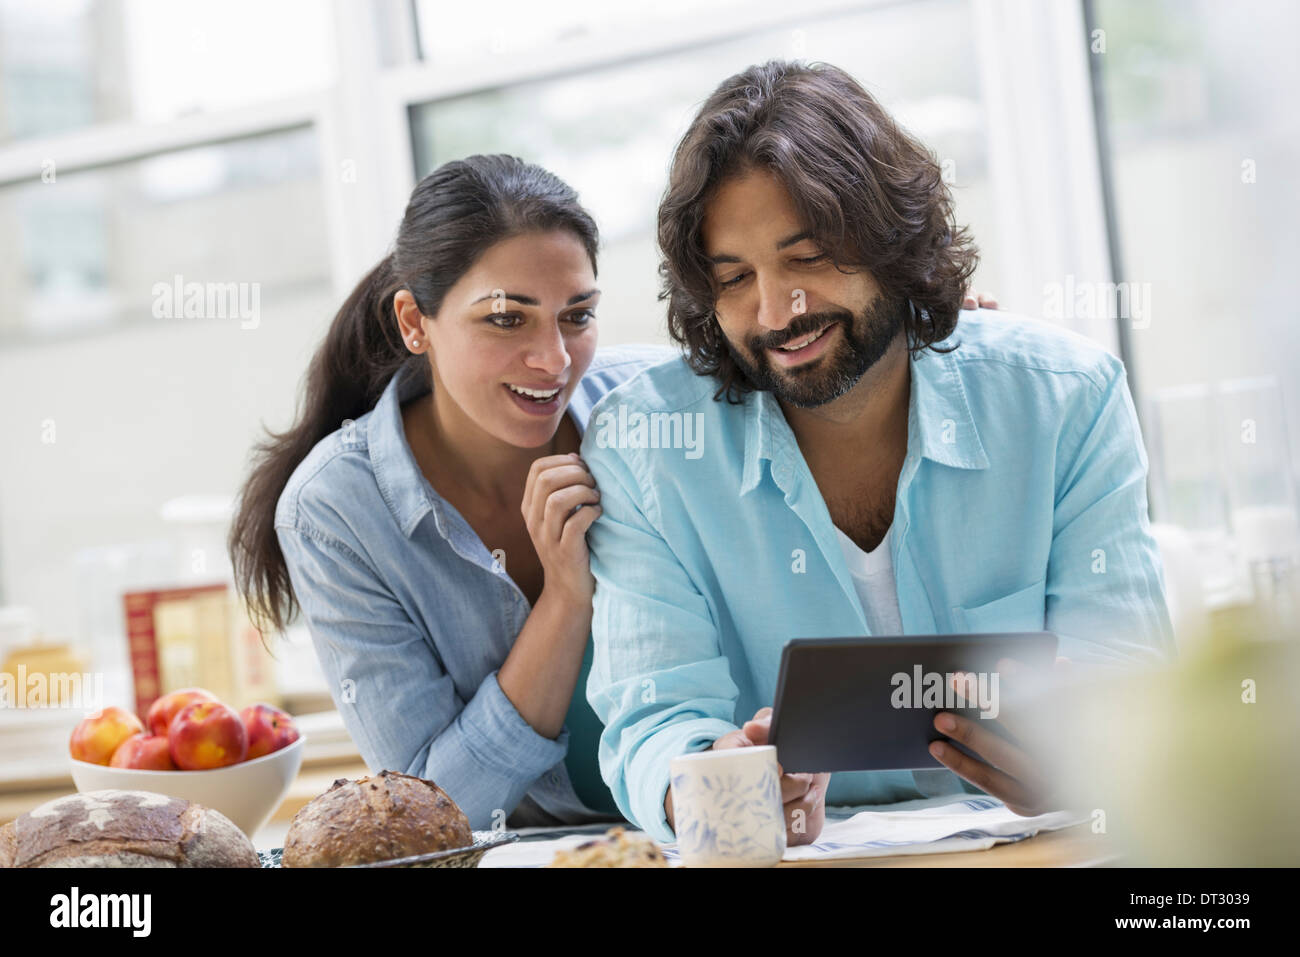 An office or apartment interior in New York City A couple side by side by the breakfast bar Food and fresh fruit Stock Photo